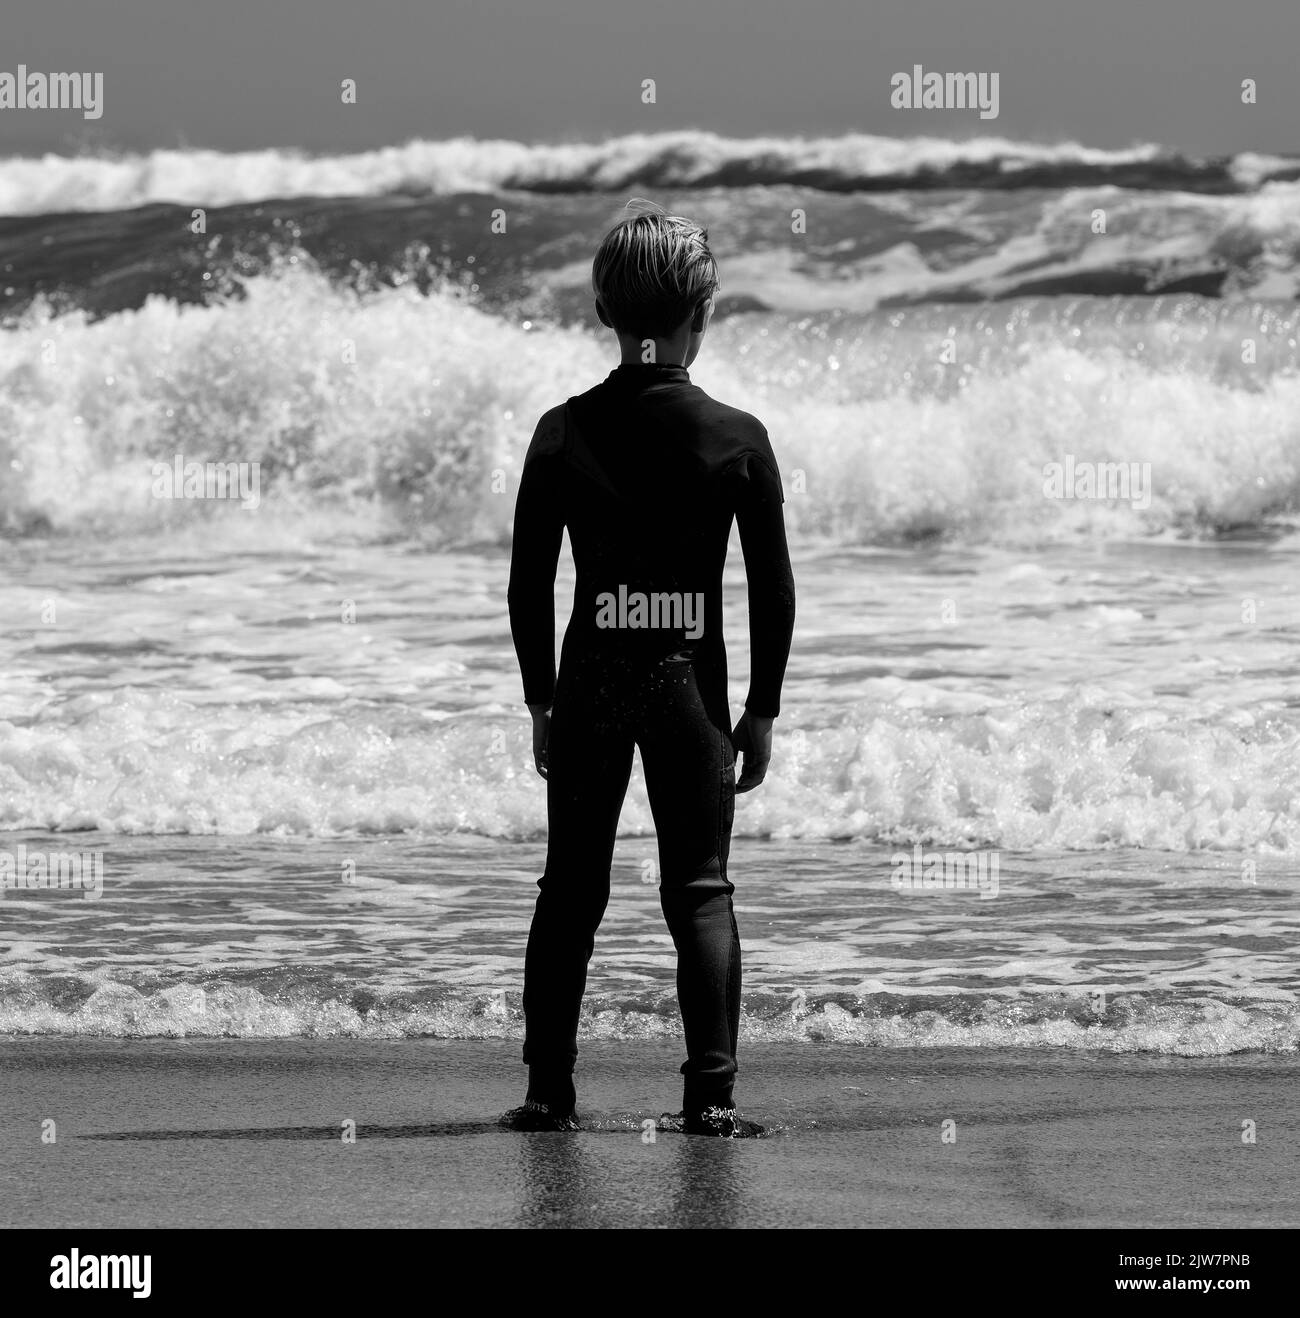 young lad Surfer enjoying the waves at Gwithian sands beach Cornwall. Black and white. Taking time to look out to sea. Stock Photo